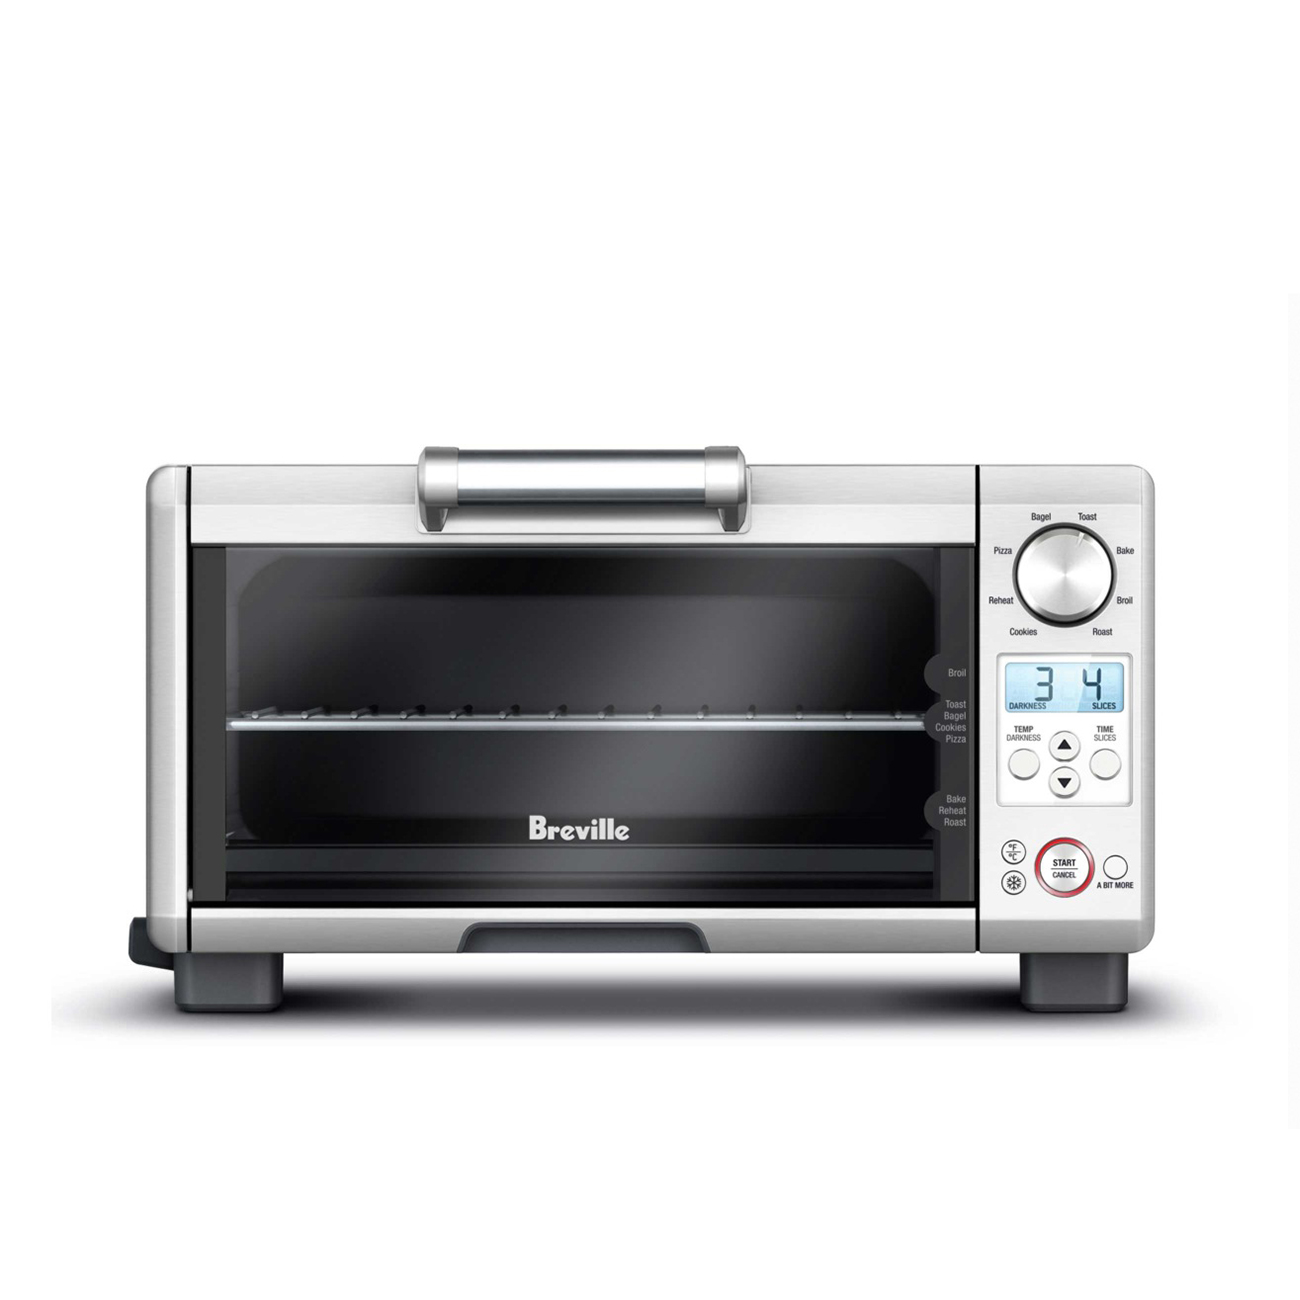 https://www.breville.com/content/dam/breville/ca/catalog/products/images/bov/bov450bss1bca1/pdp.jpg?pdp